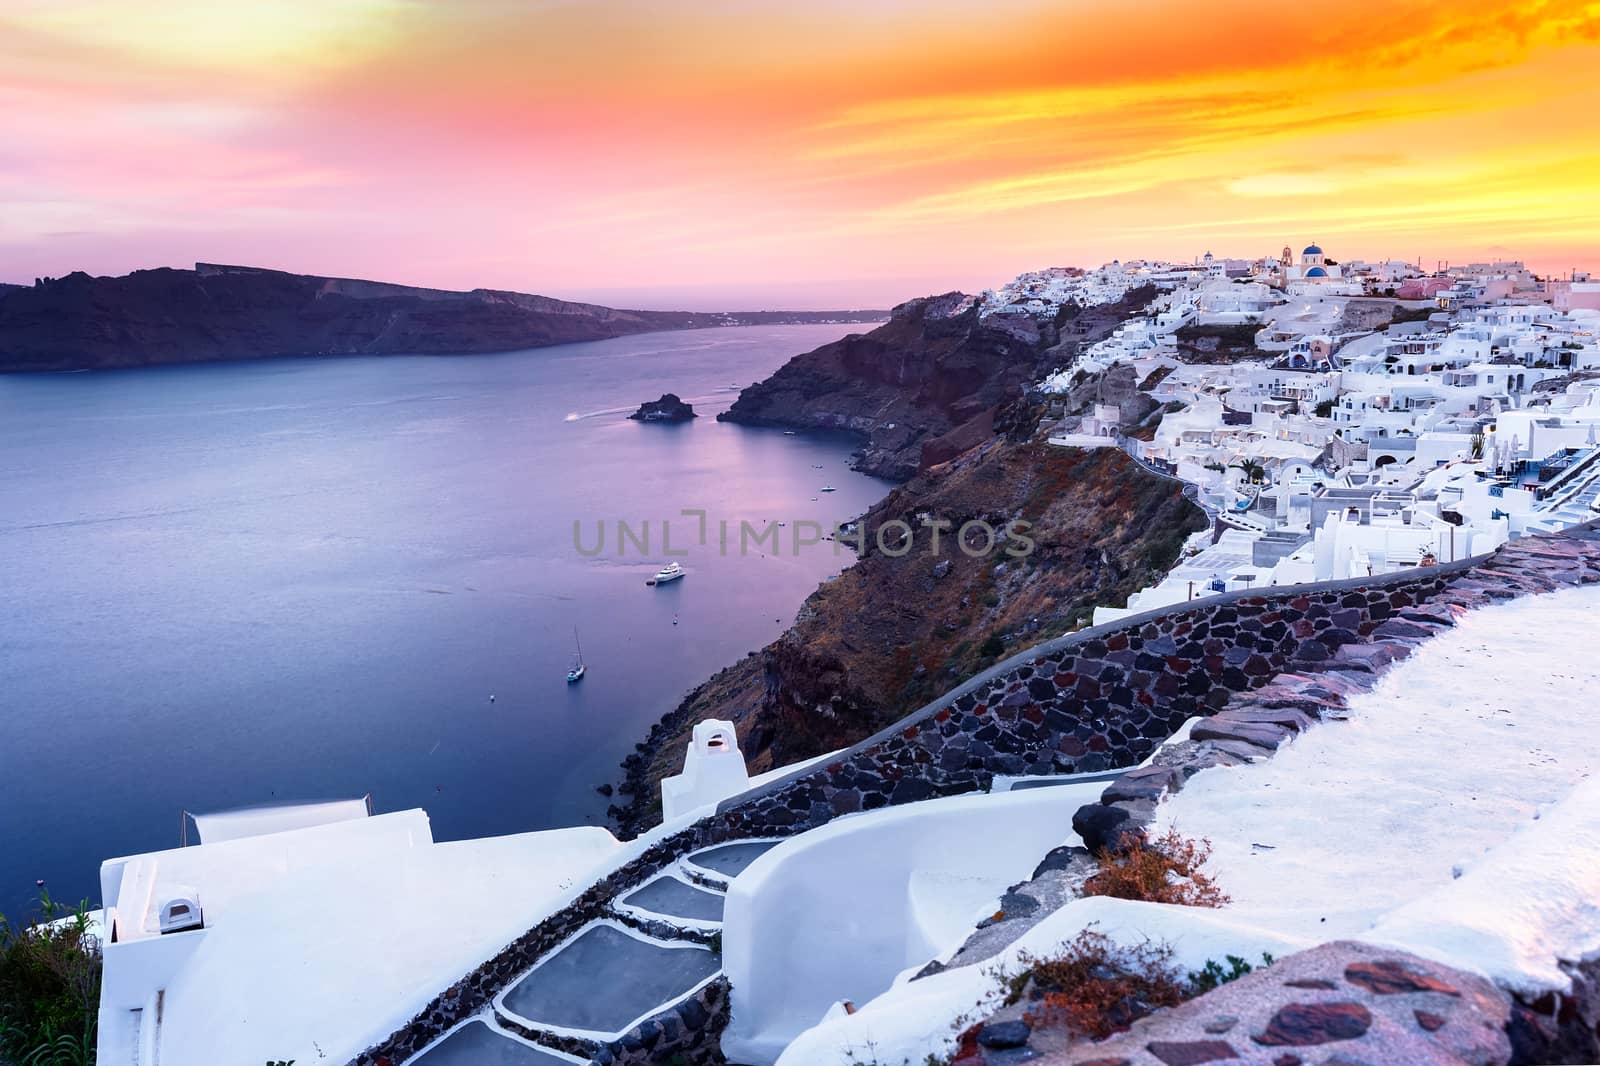 World famous Oia village at sunset, Santorini.  Caldera and traditional, famous white washed buildings and churches with blue domes over the caldera,Santorini island, Greece.